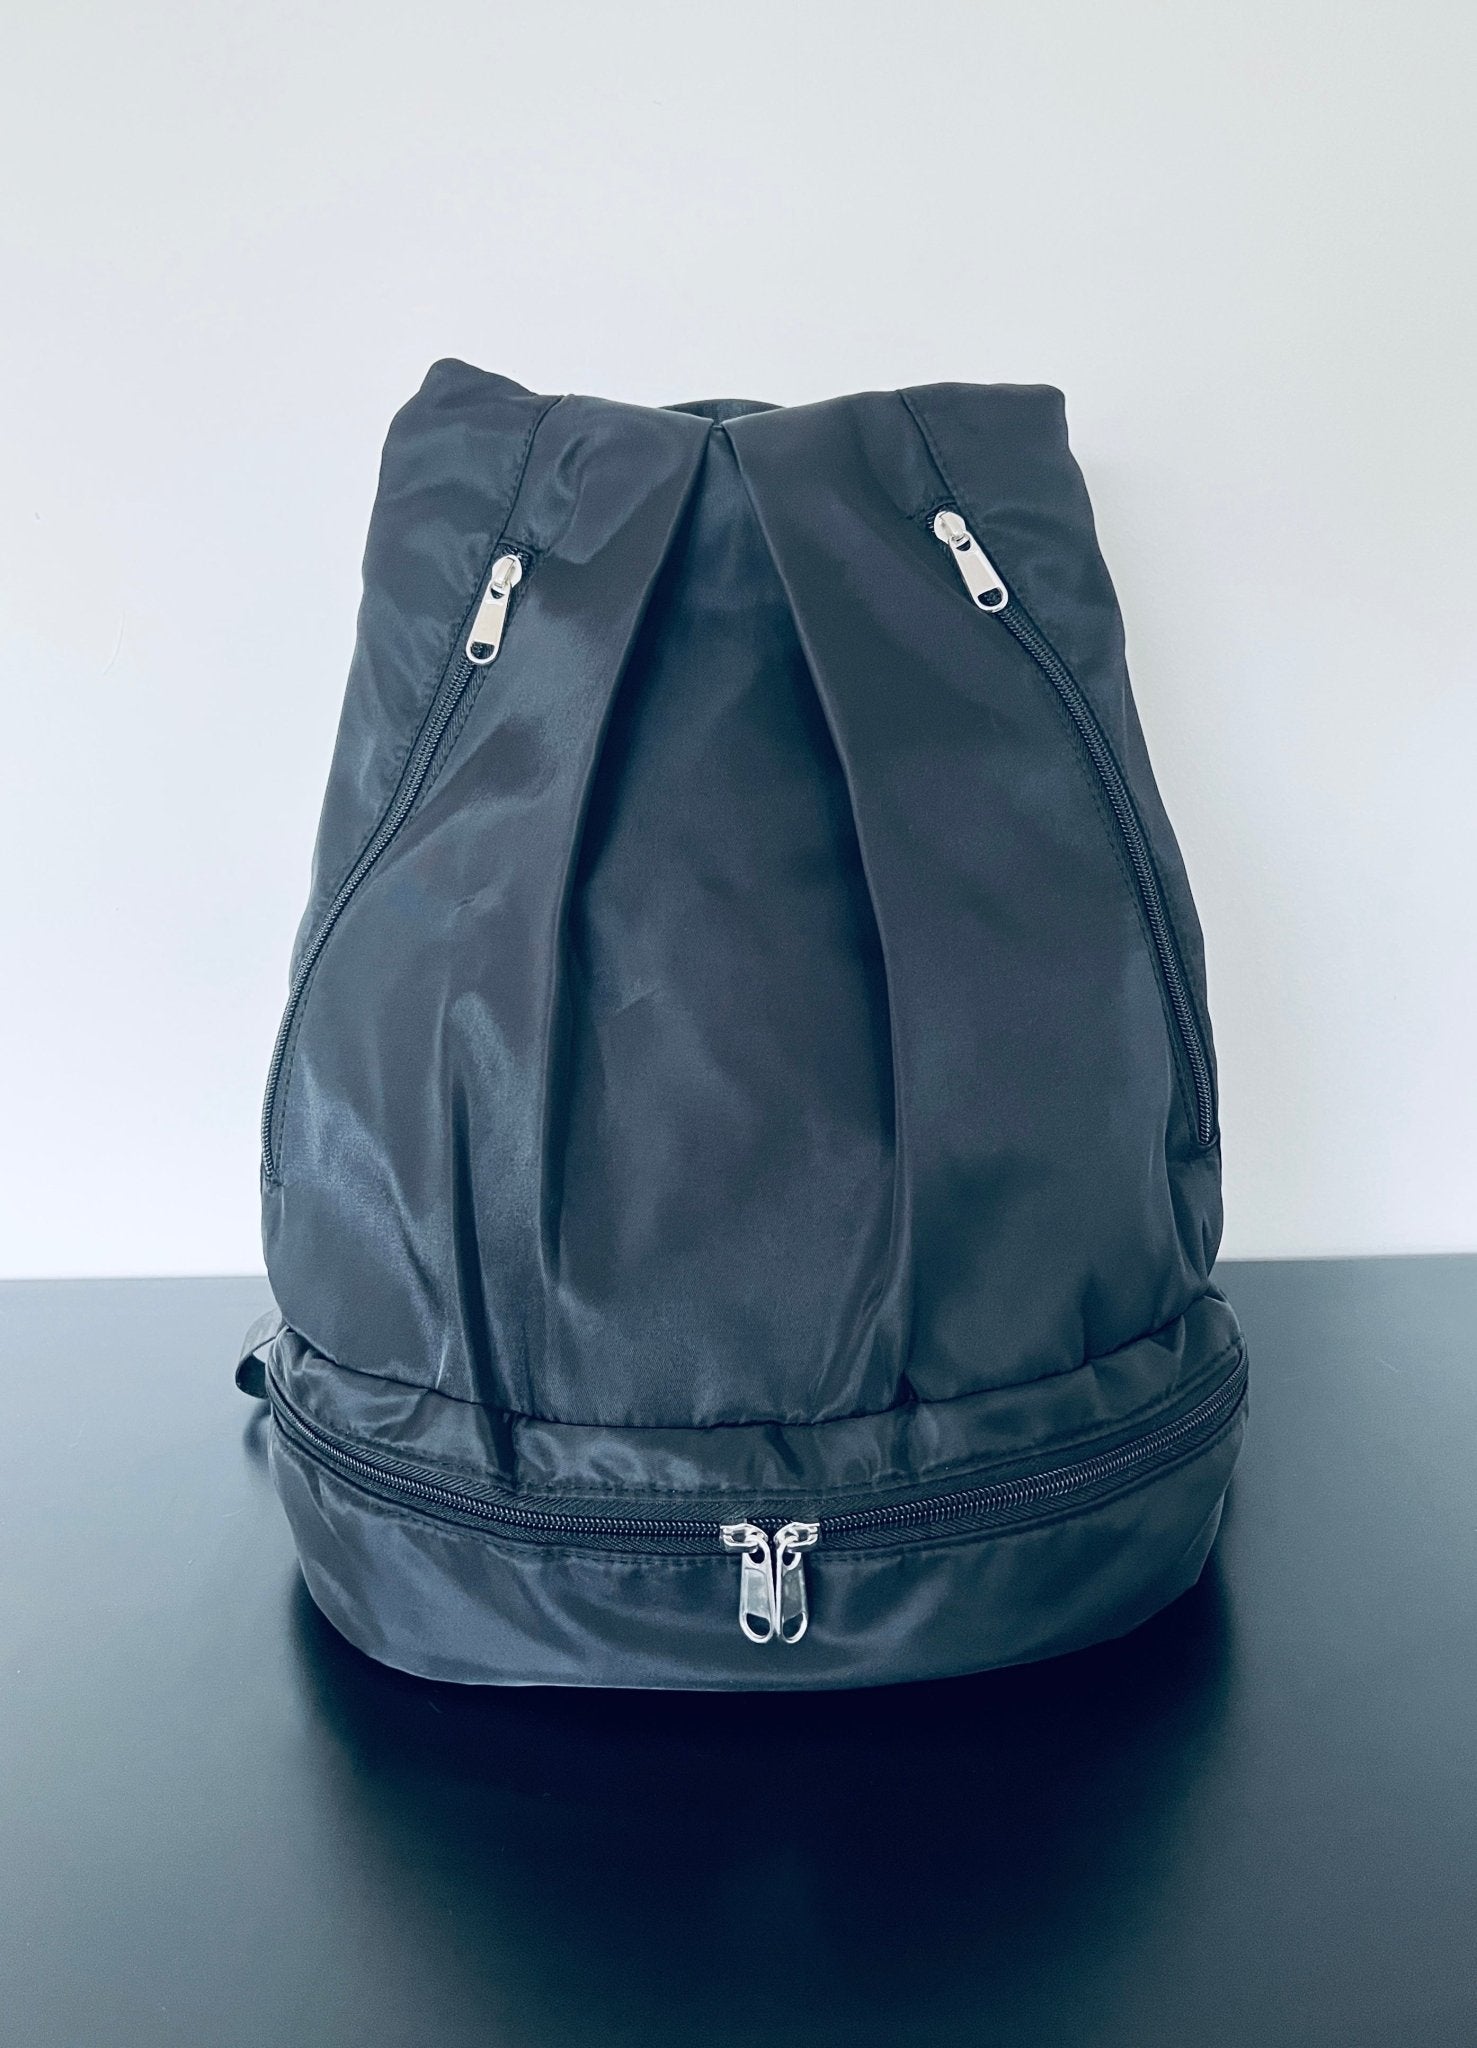 Dance Backpack - Black - THE COLLECTIVE DANCEWEARDance Backpack - Black#mBAGTHE COLLECTIVE DANCEWEAR